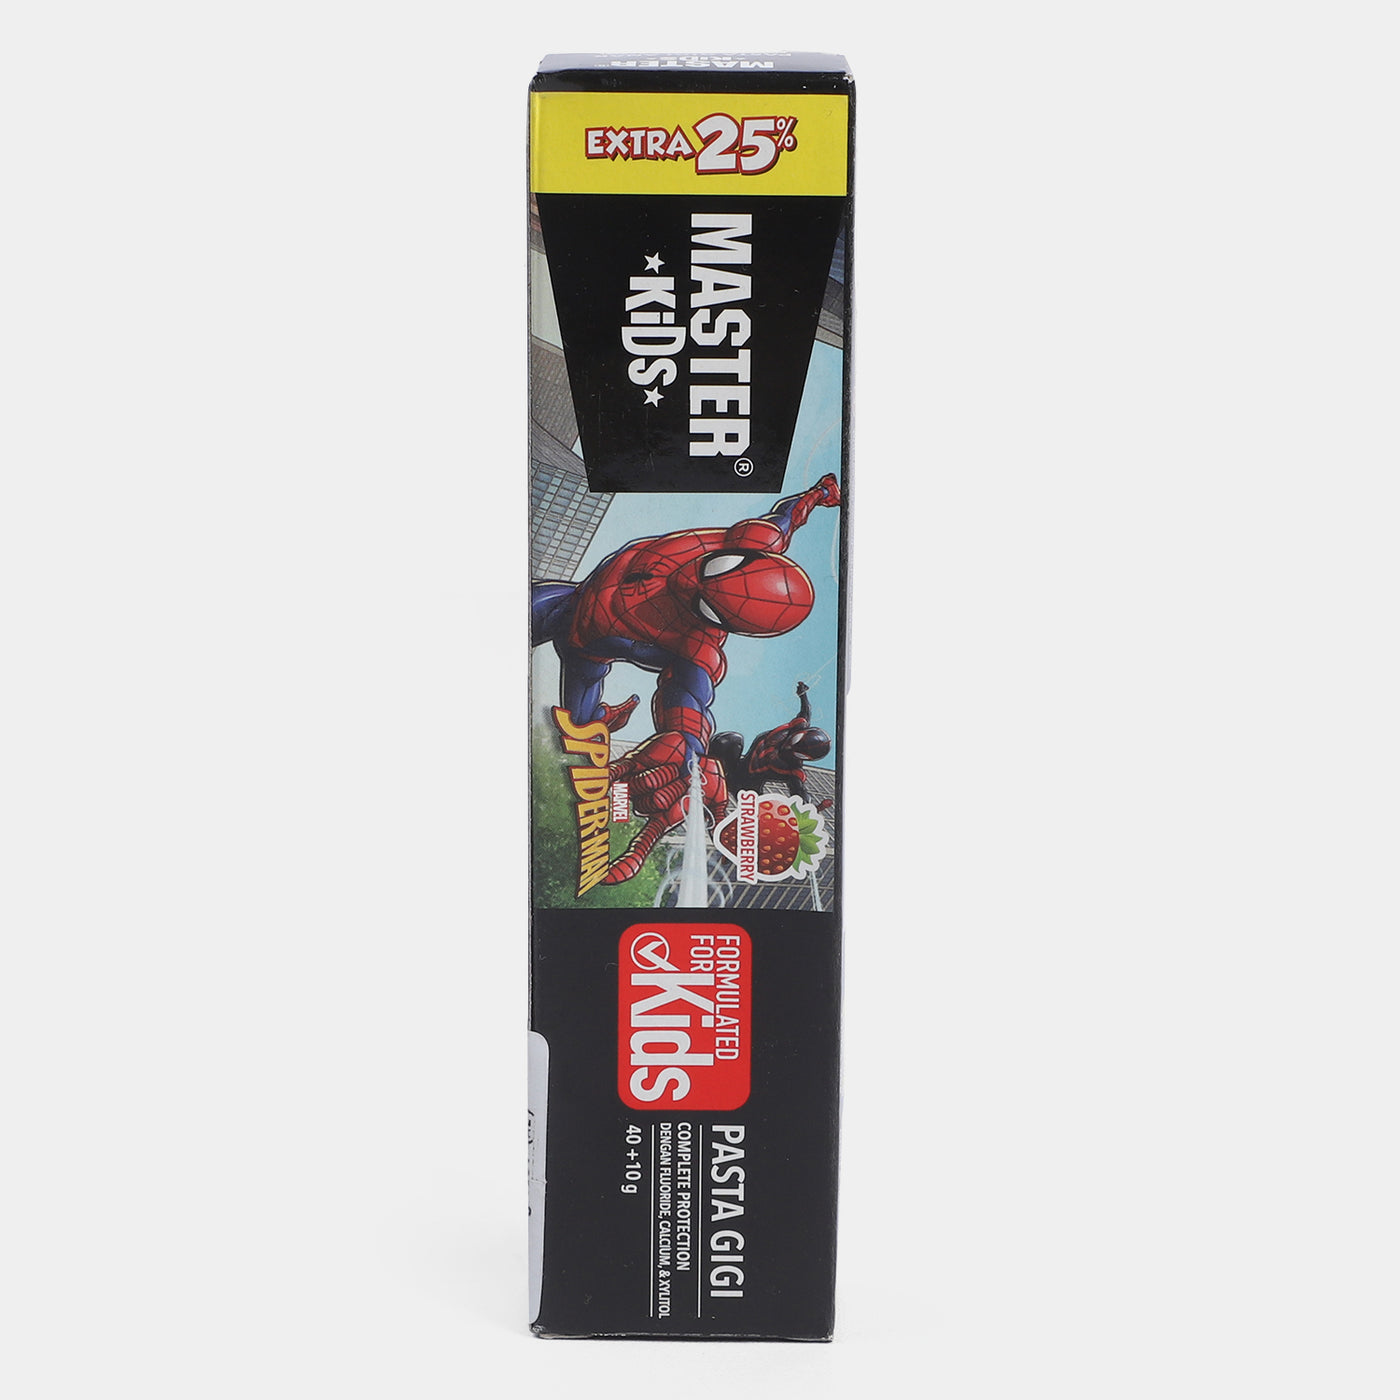 Master Kids Character Tooth Paste | 50G